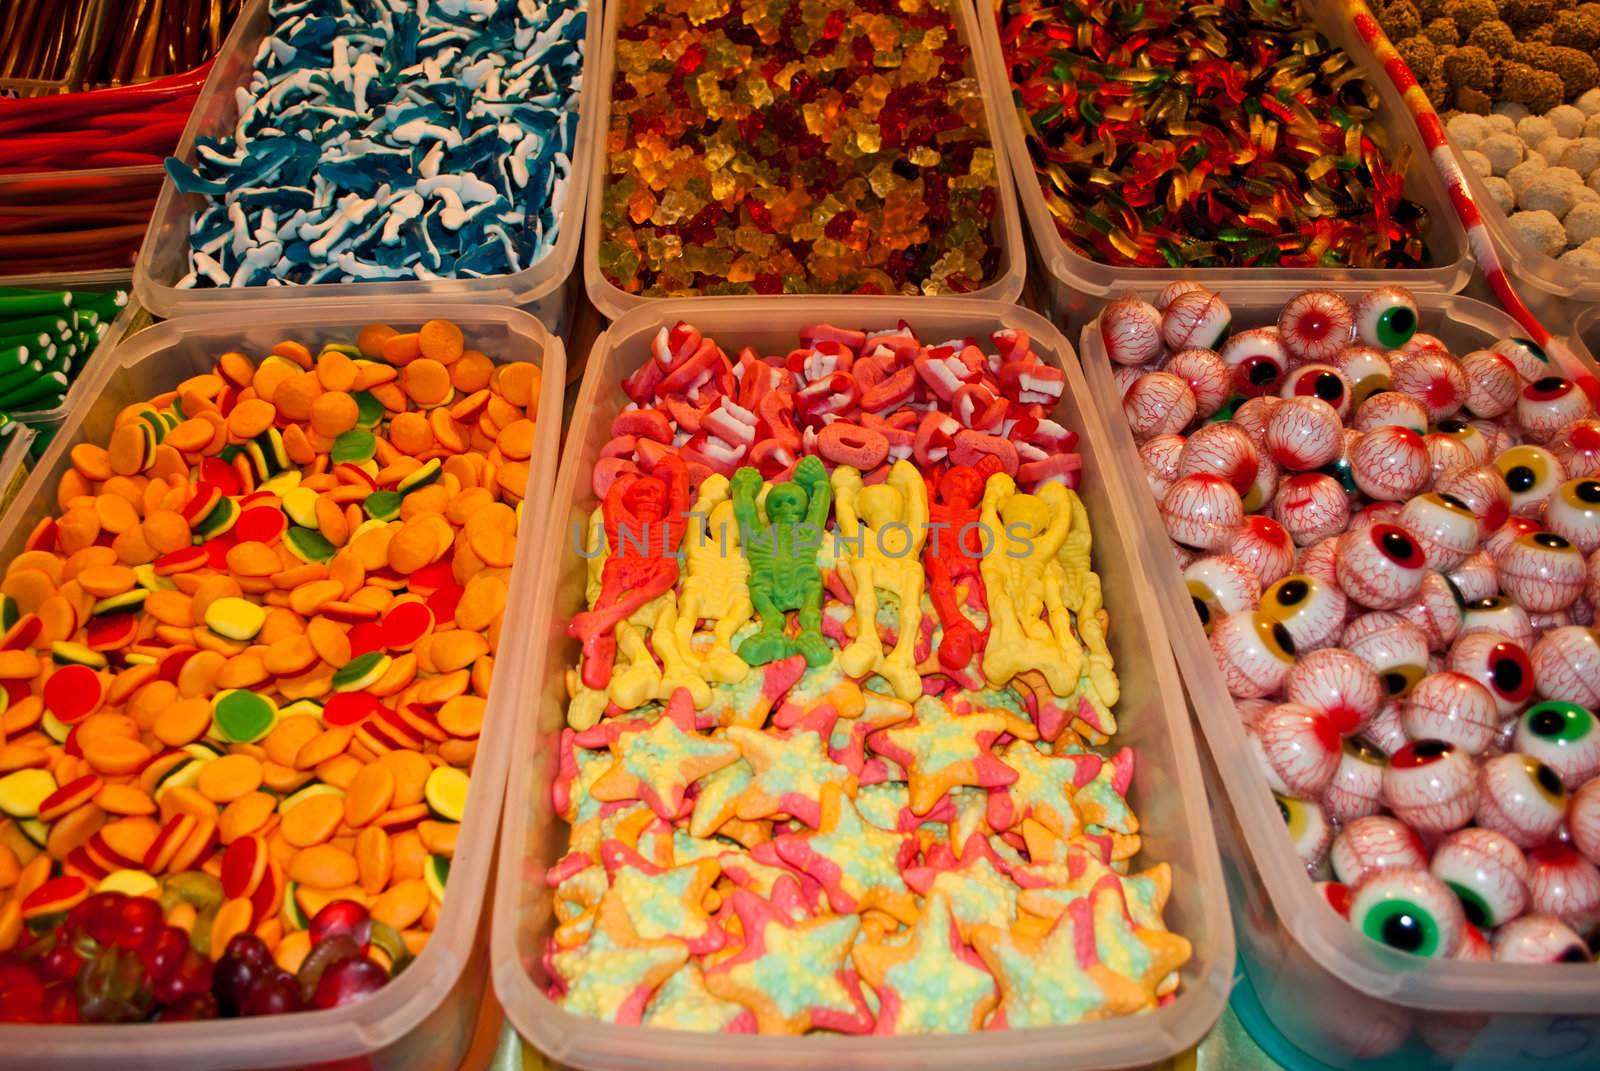 Assorted and colorful candies in a candy store.